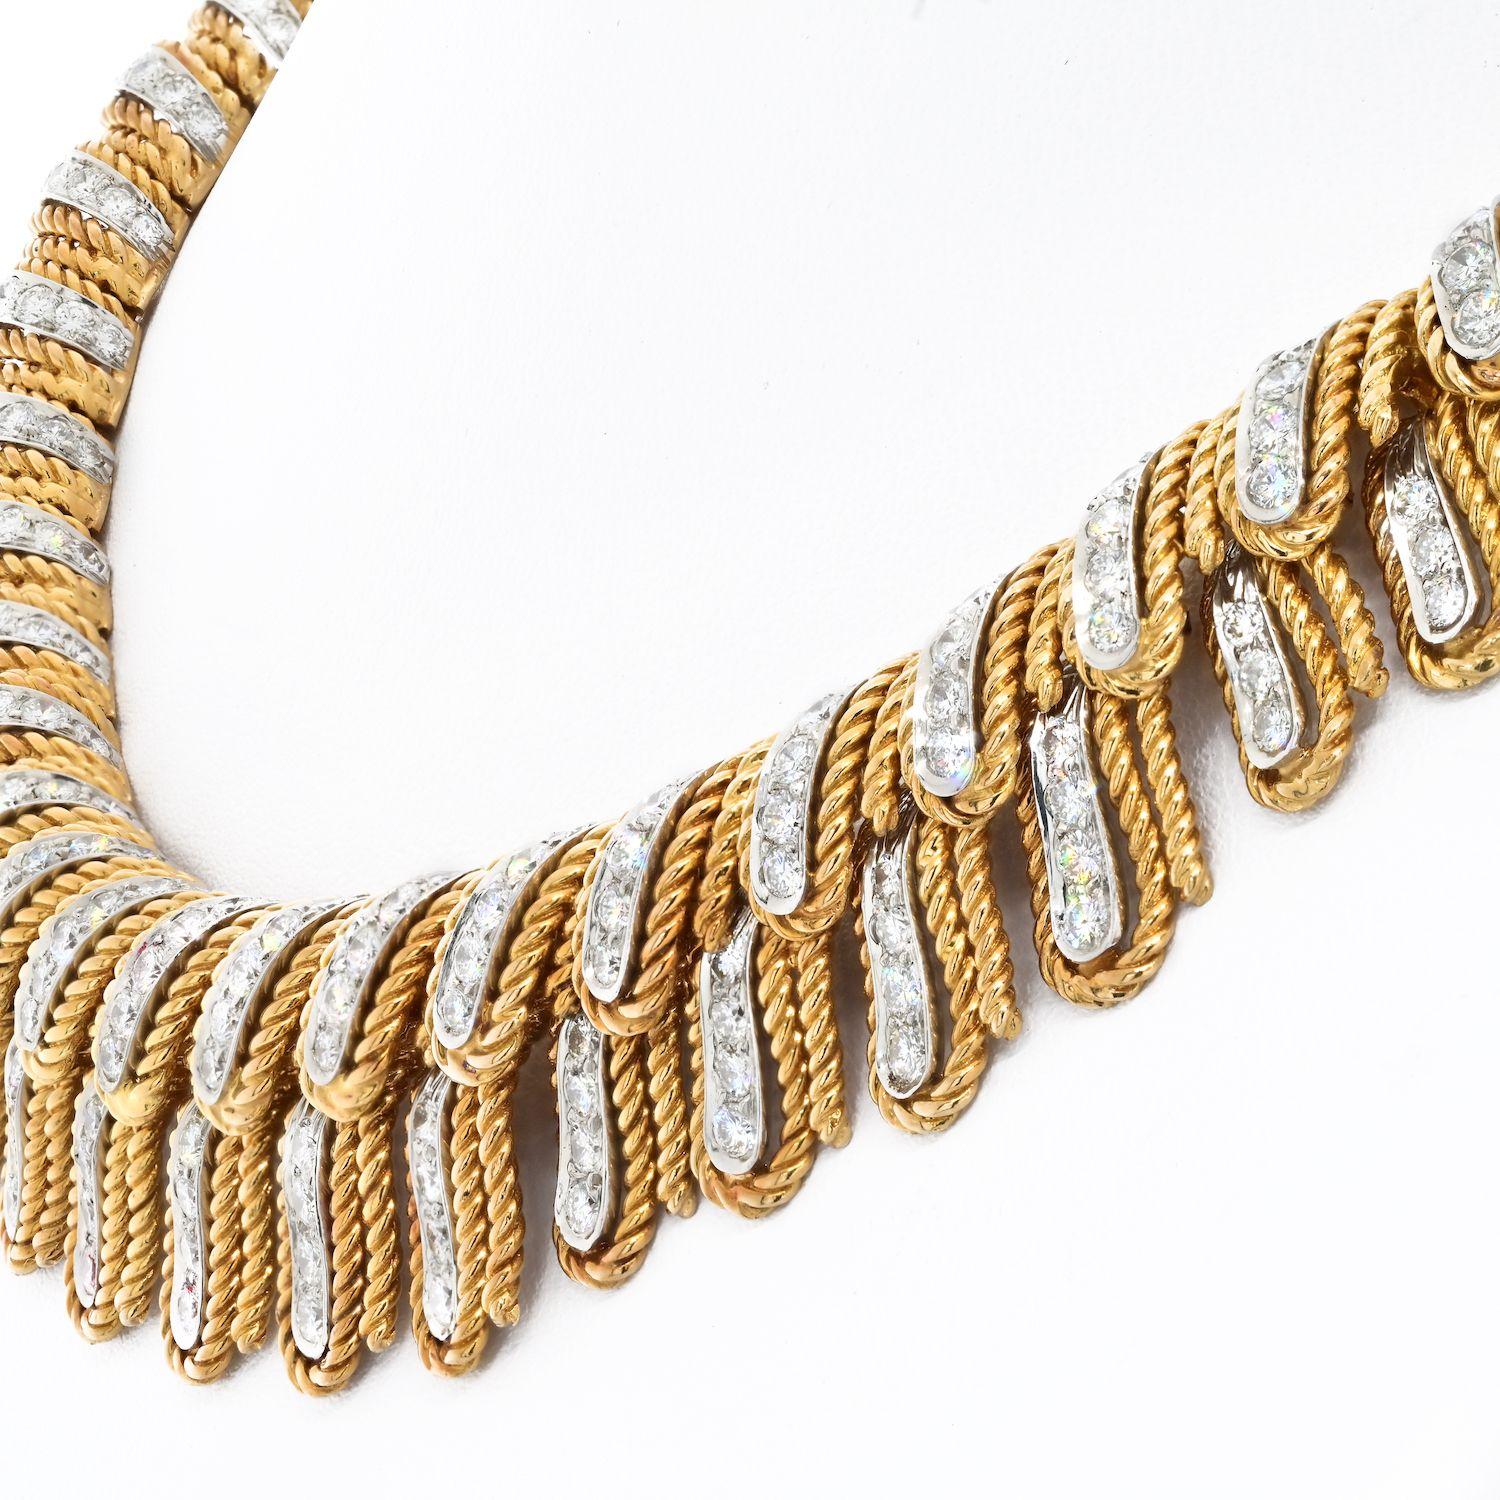 The 18k and platinum David Webb collar necklace stands out due to its unique design of diamond-set feathers within rope surrounds. The graduating size of the feathers adds to its beauty, making it a spectacular piece of jewelry. 
To make a statement